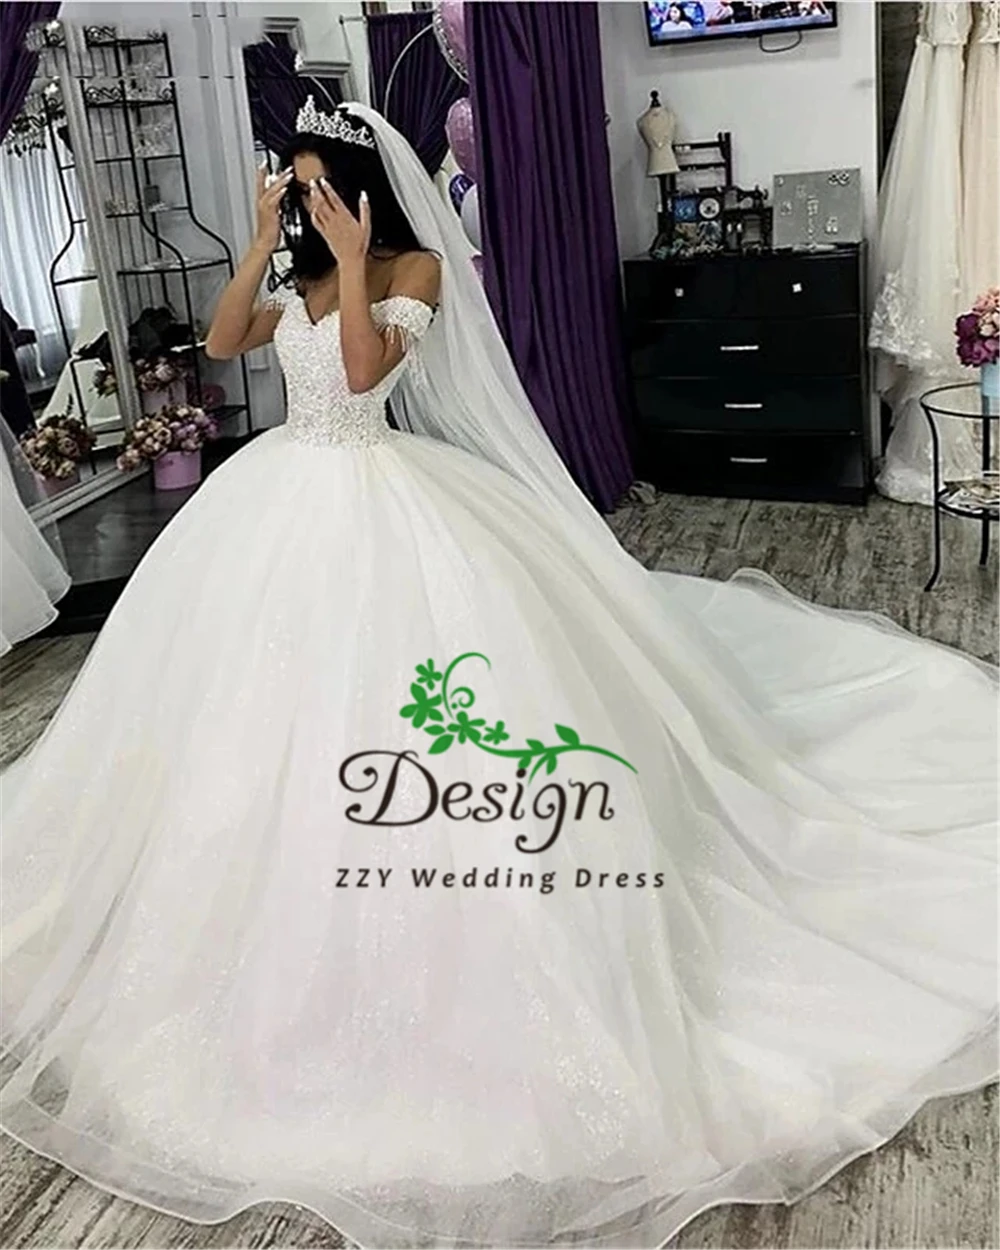 

Sparkling Blingbling Ivory Crystals Beading Ball Gown wedding gown Off The Shoulder V-neck Lace-Up Custom-Made robe de mariage